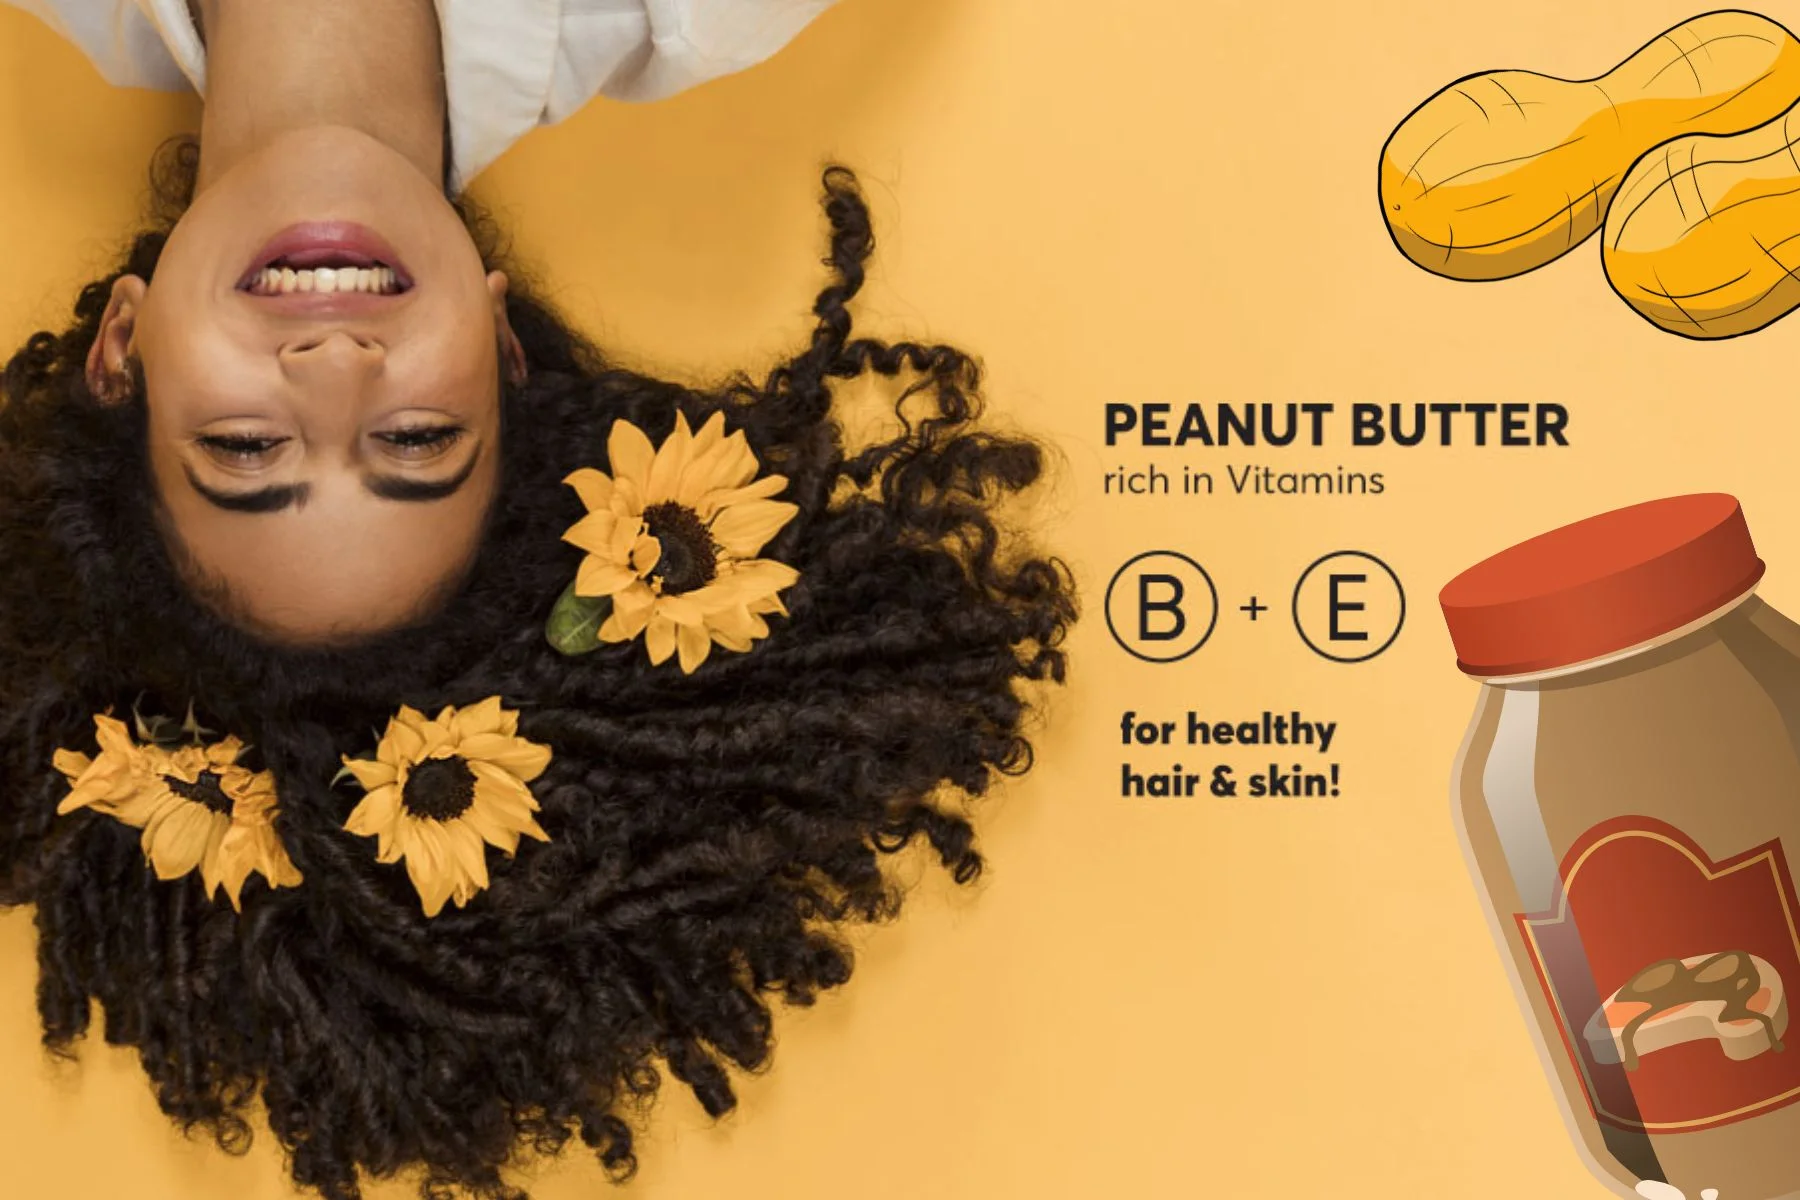 Peanut Butter: The Secret to Healthy Hair and Skin